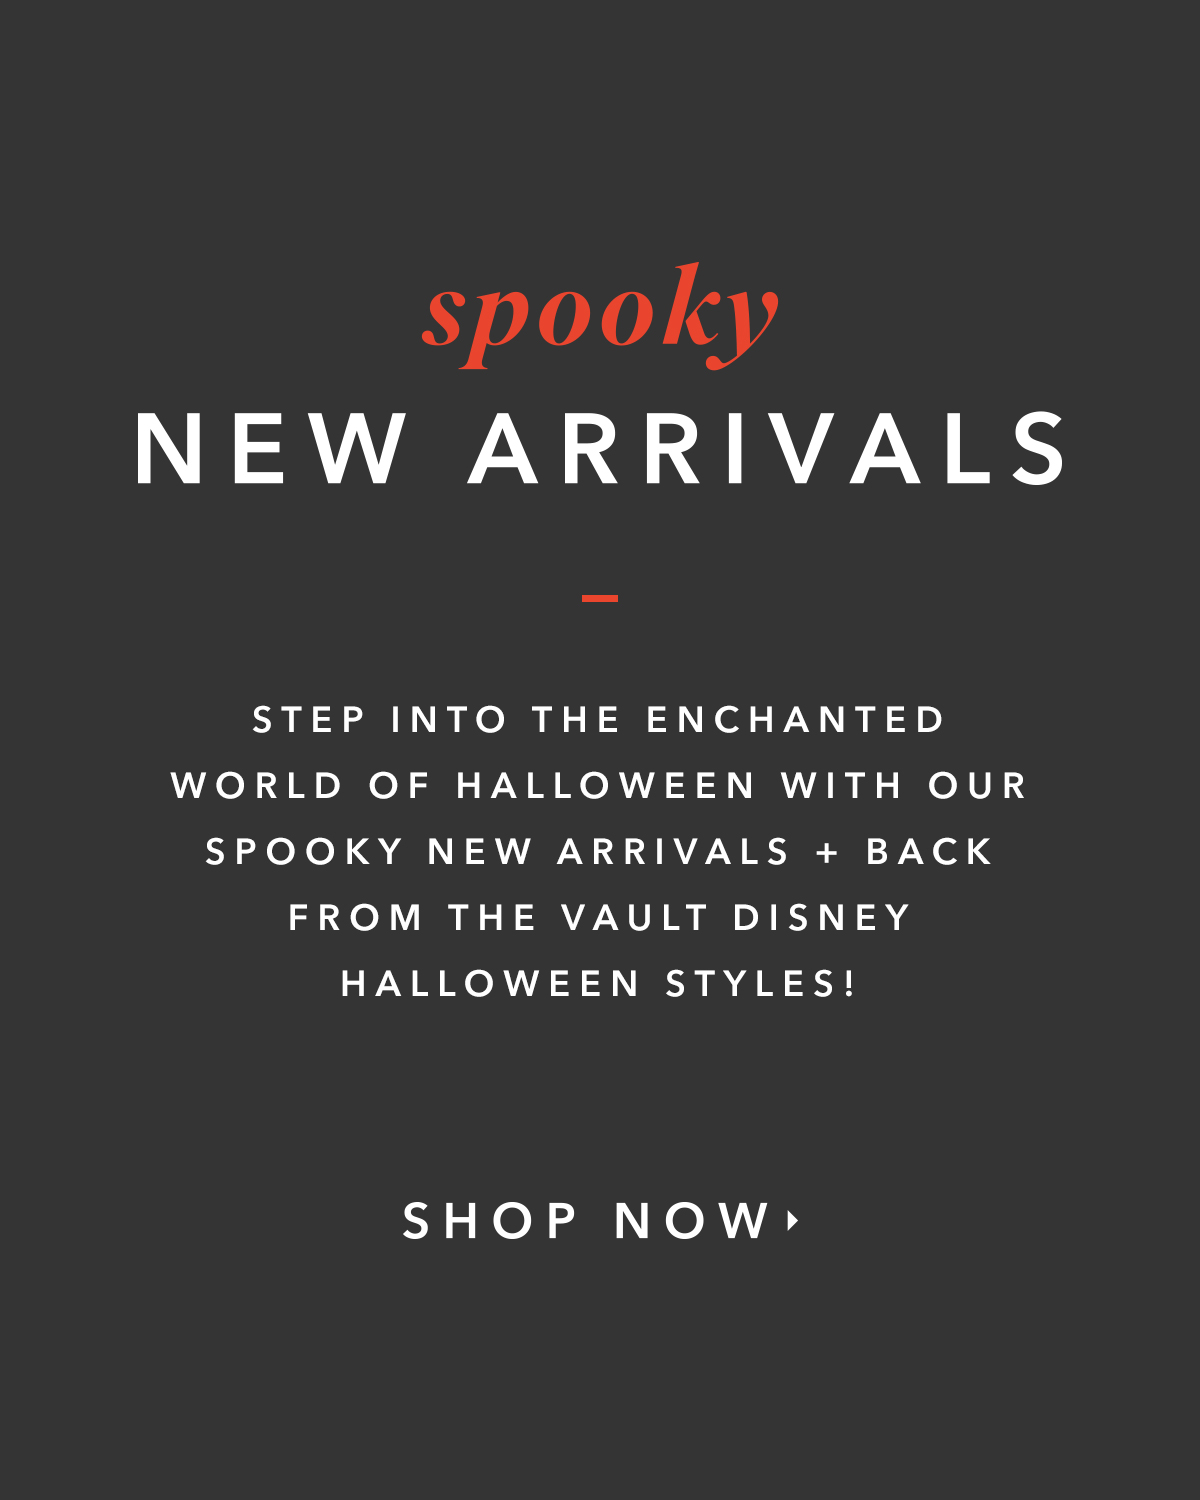 SPOOKY NEW ARRIVALS + BACK FROM THE VAULT DISNEY HALLOWEEN STYLES